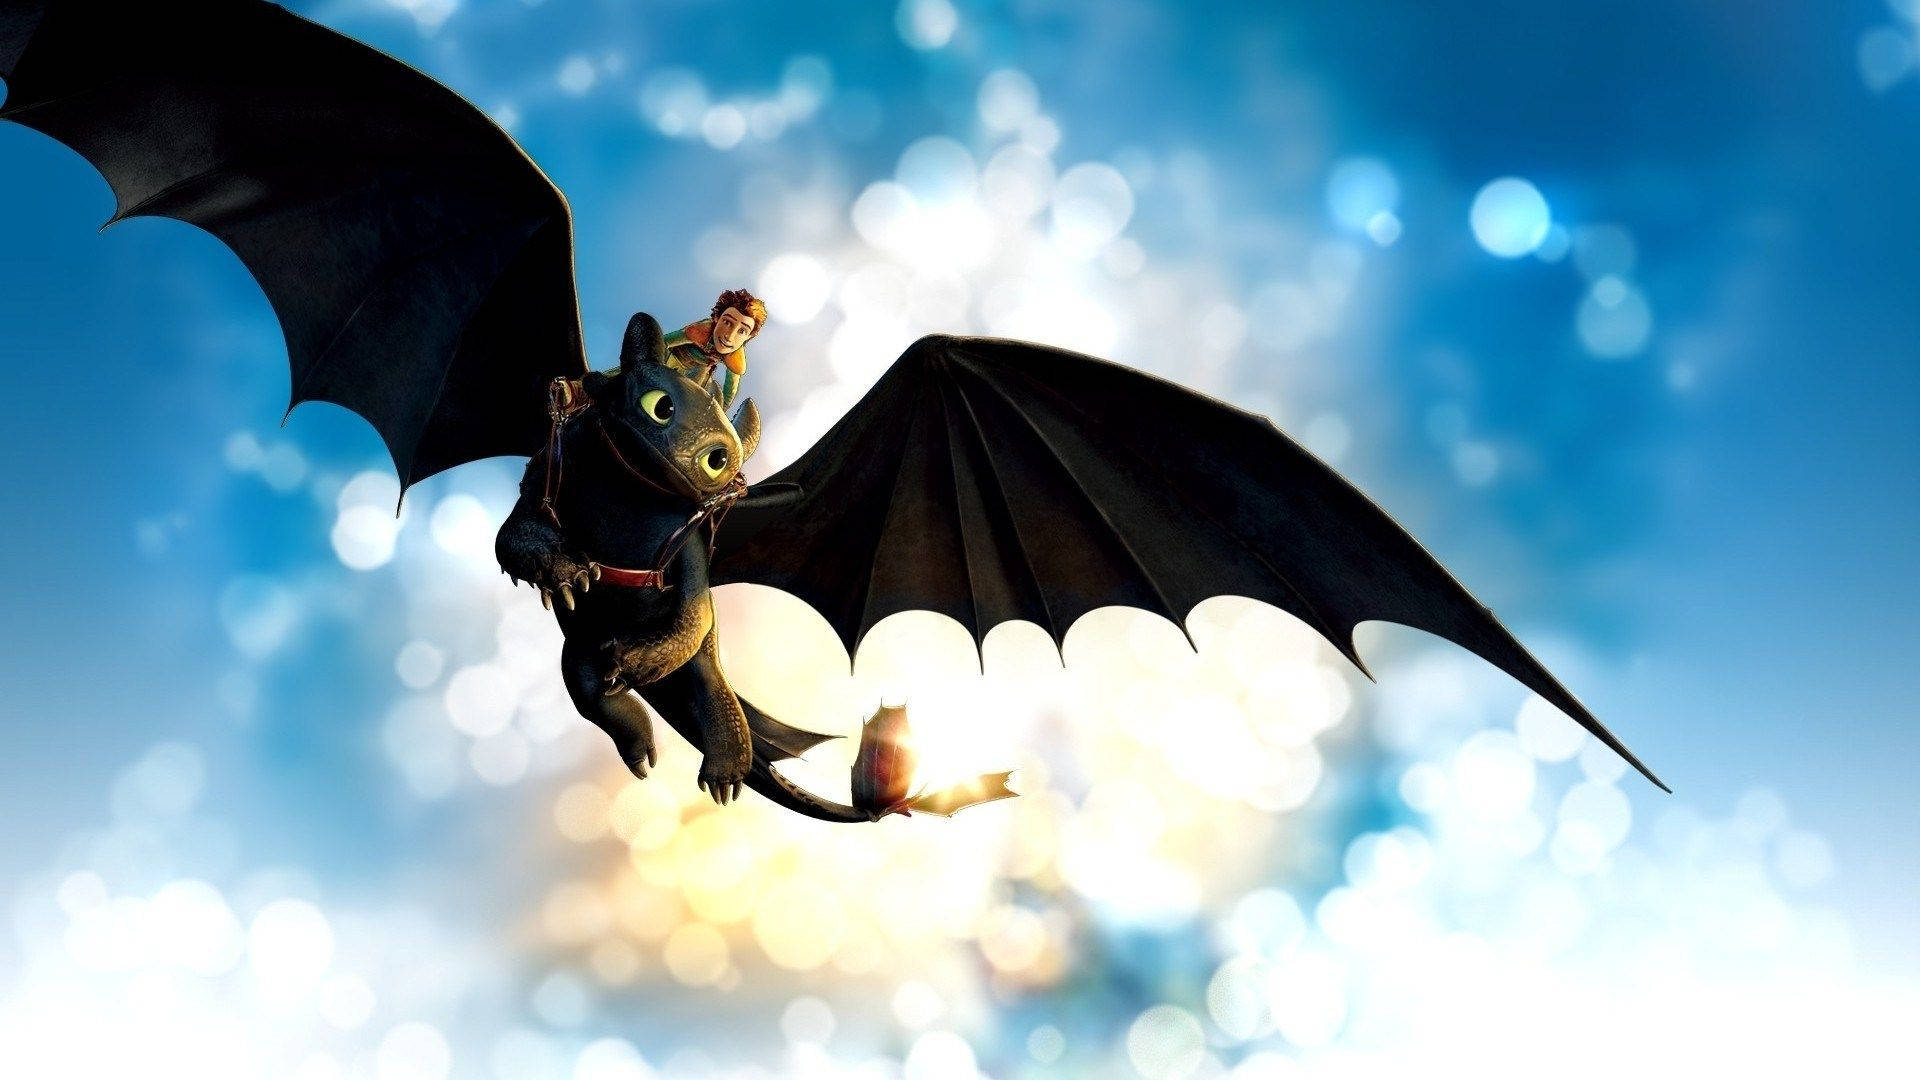 Toothless wallpaper 2560x1440 resolution - How to Train Your Dragon